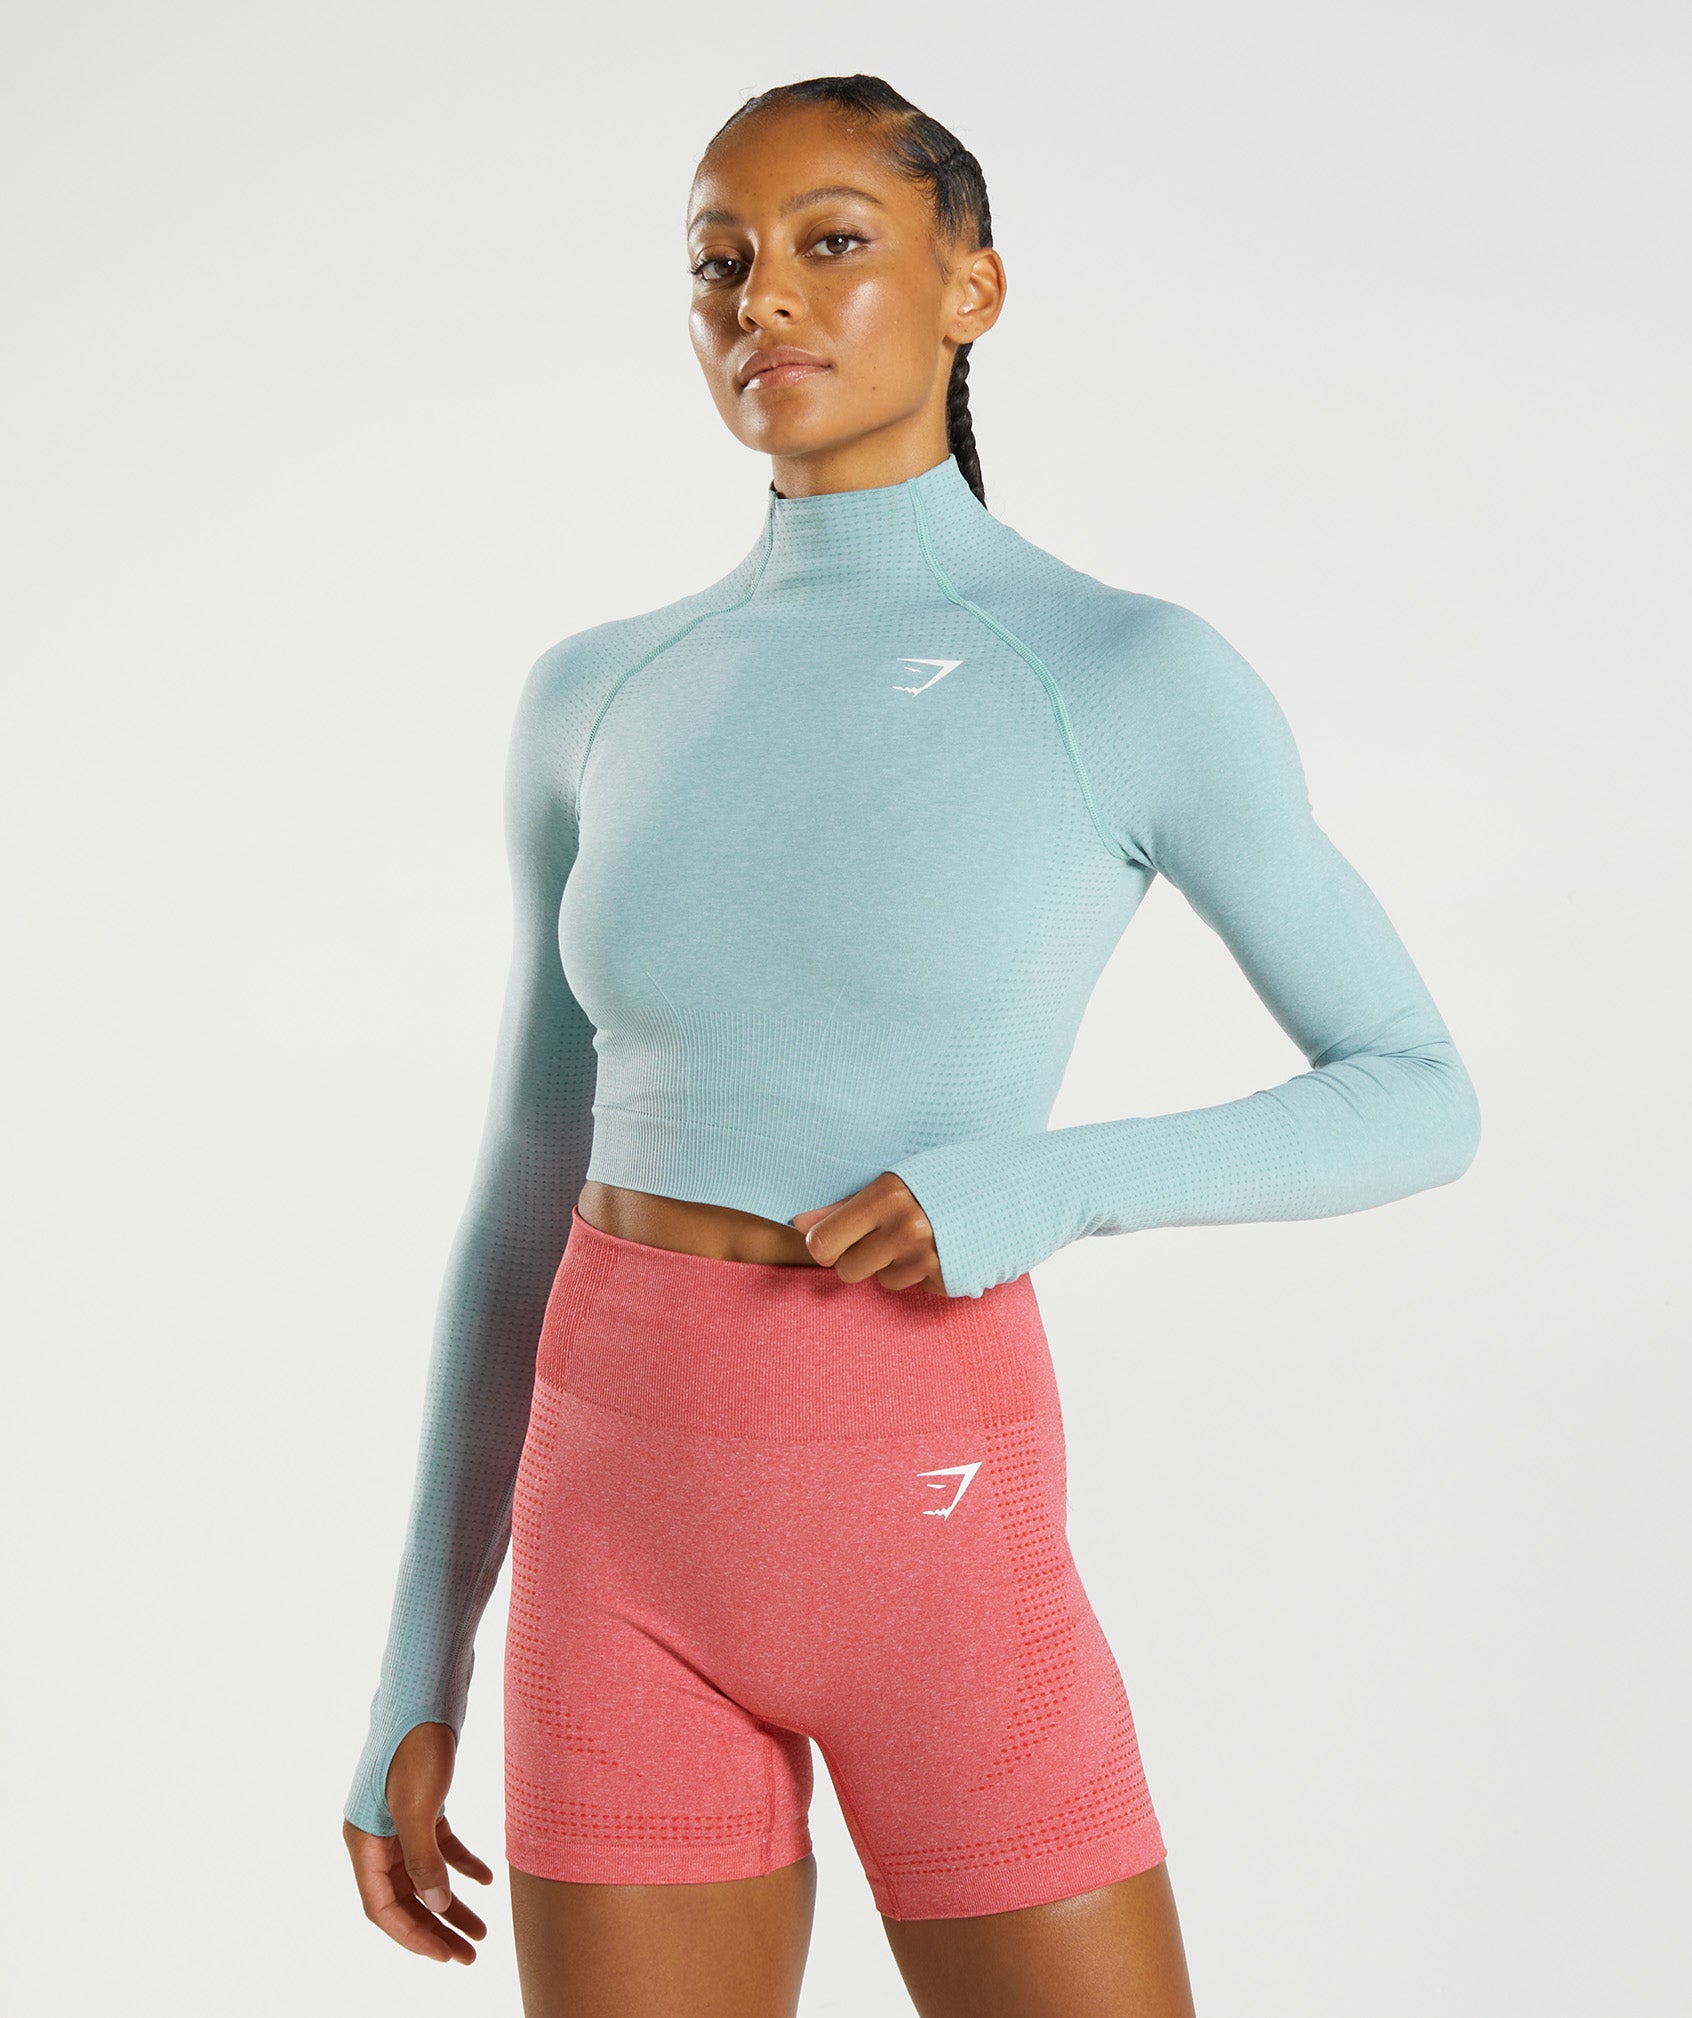 Vital Seamless 2.0 High Neck Midi Top in Pearl Blue Marl is out of stock